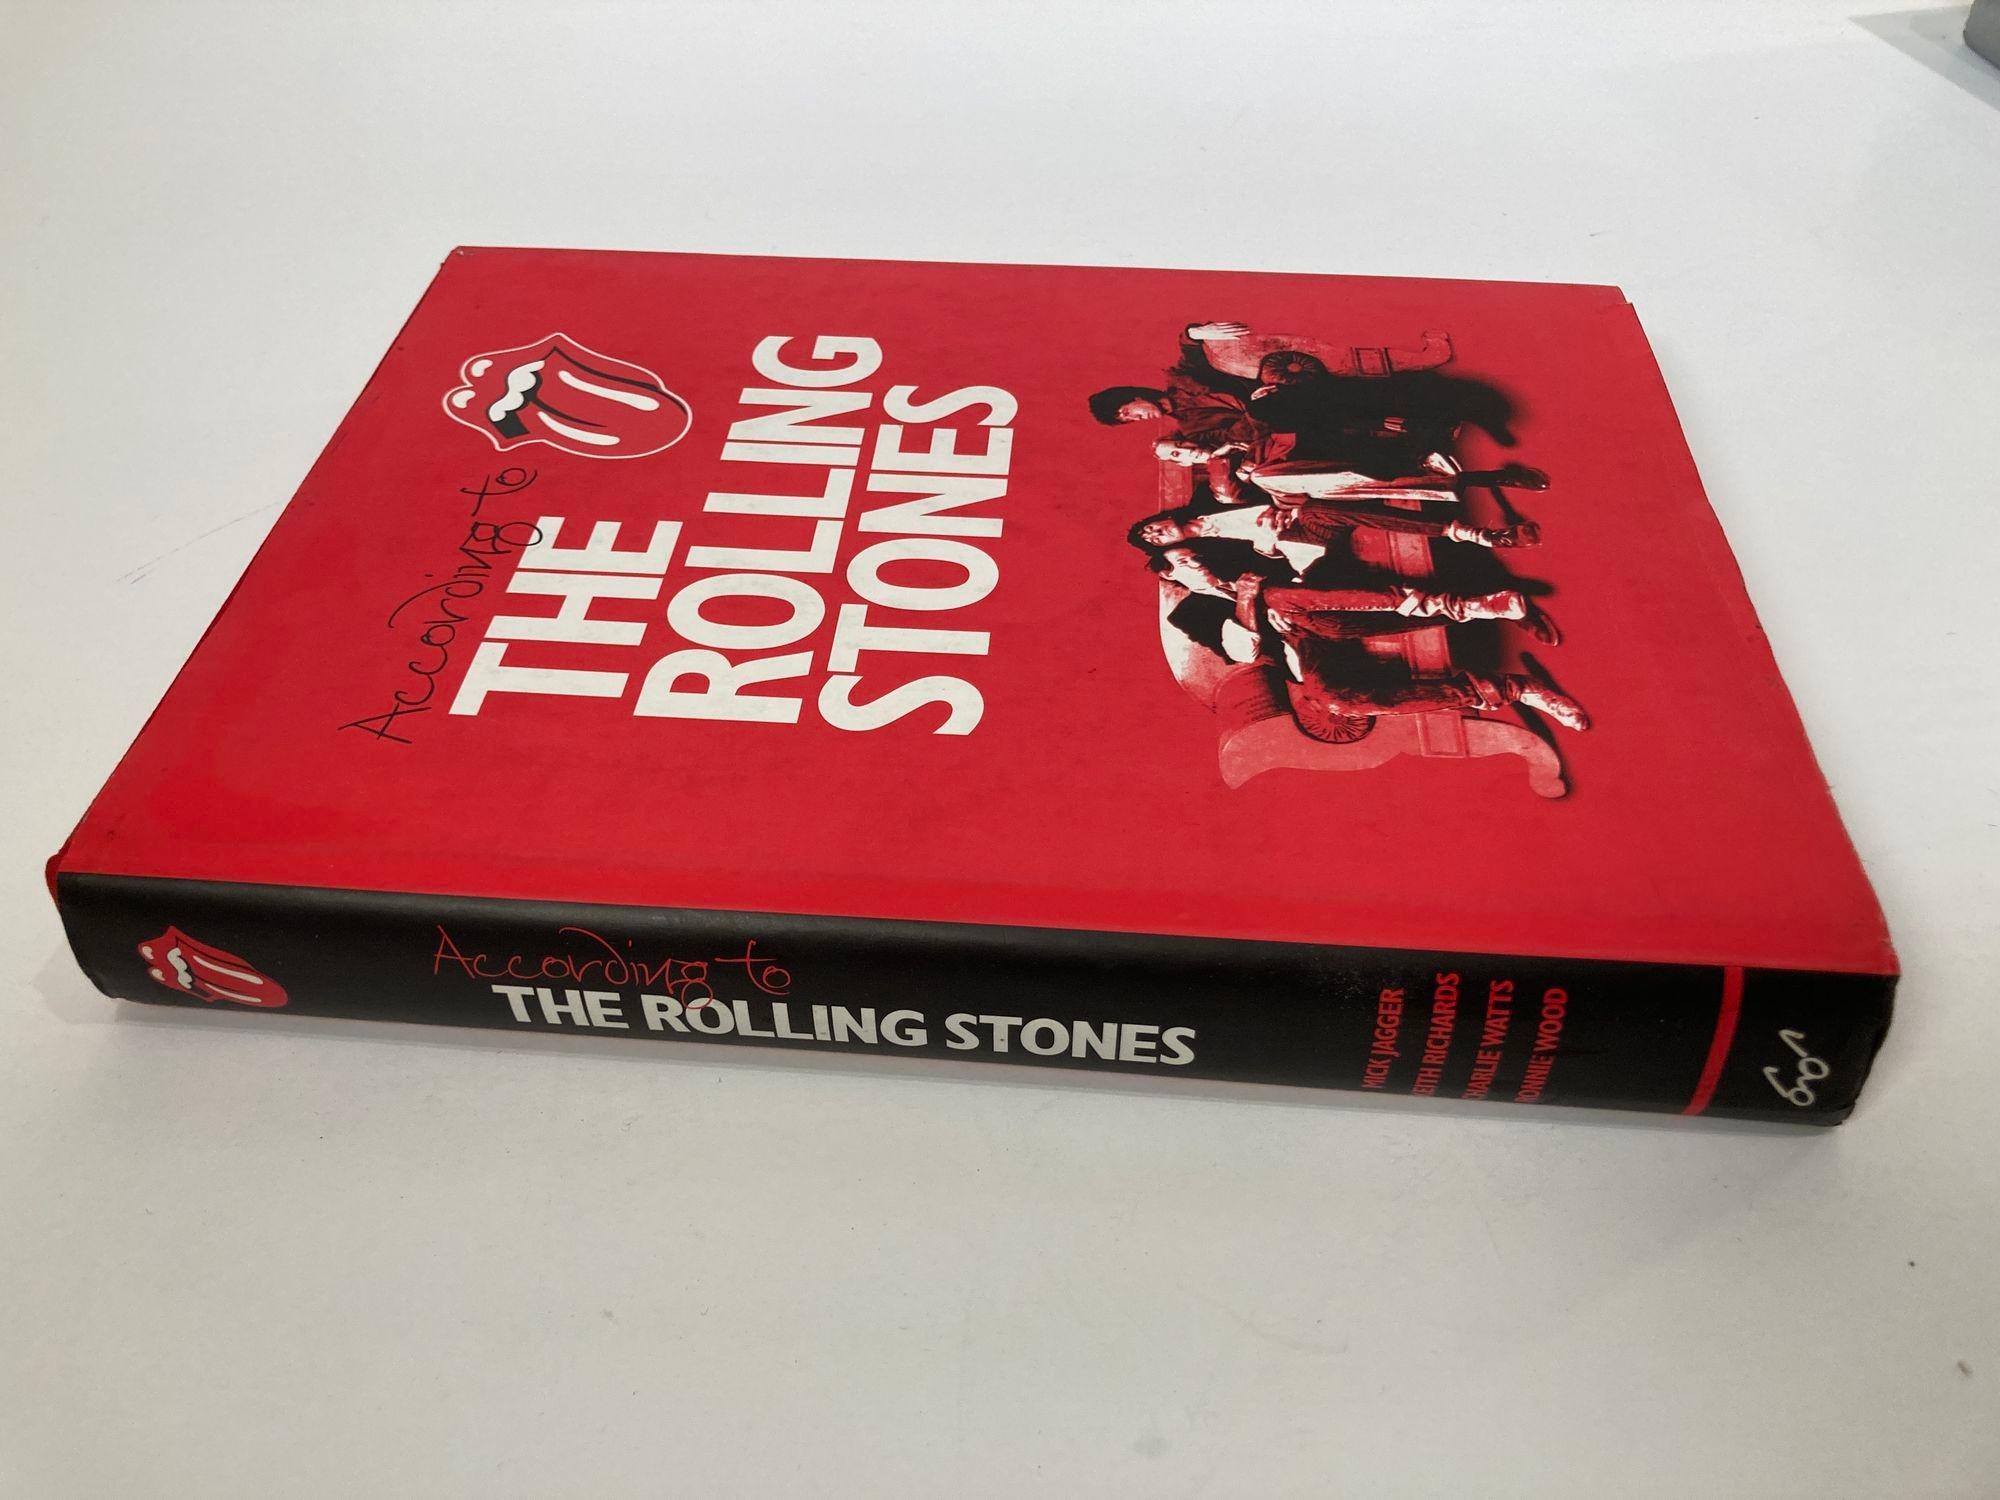 American According to The Rolling Stones Hardcover Table Book For Sale